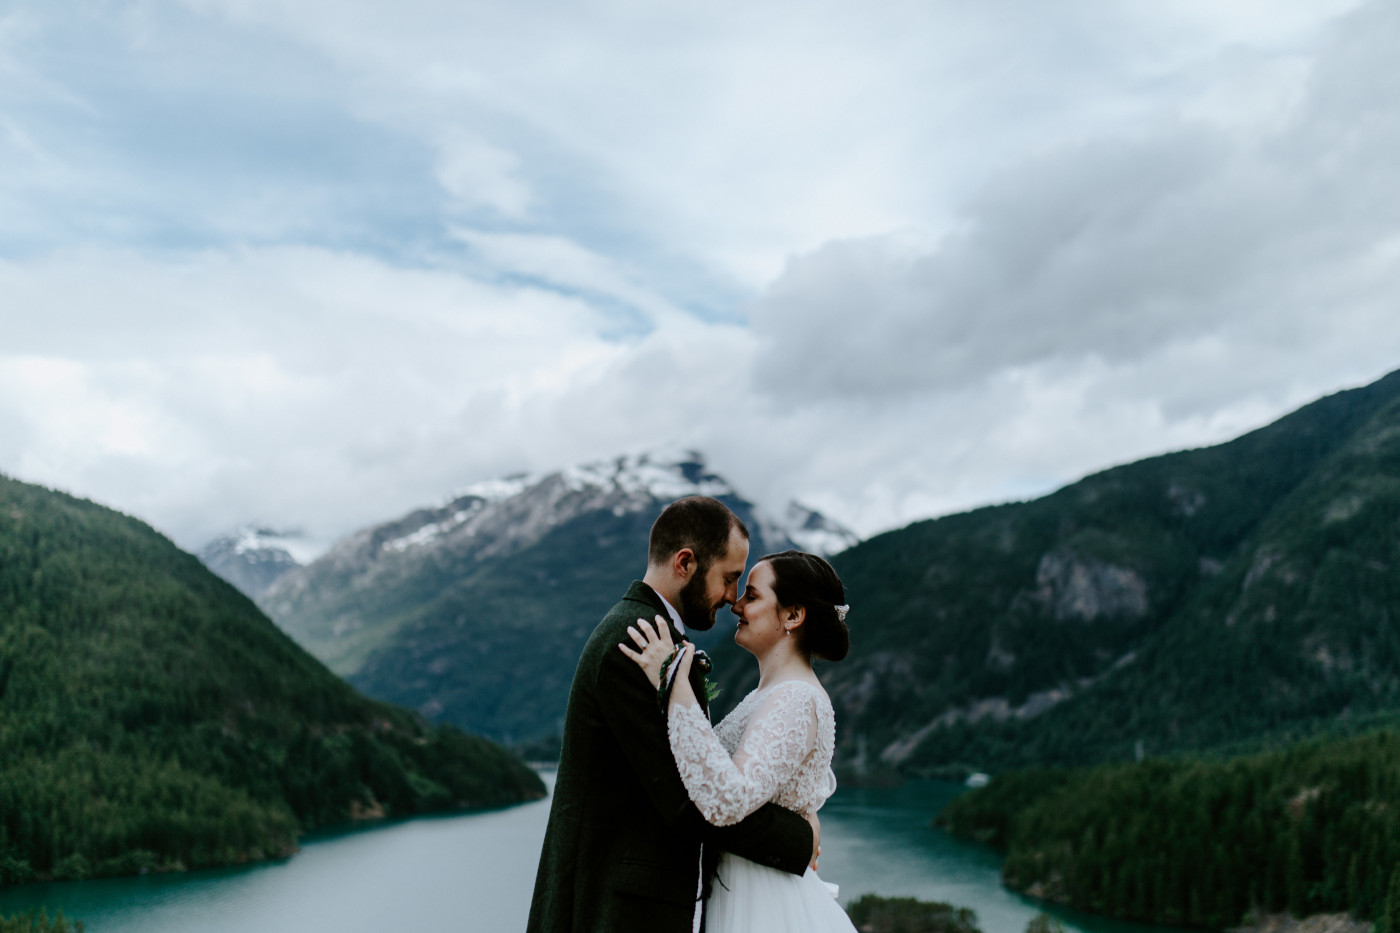 Elizabeth and Alex hugging at the top of Diablo Lake Overlook. Elopement photography at North Cascades National Park by Sienna Plus Josh.